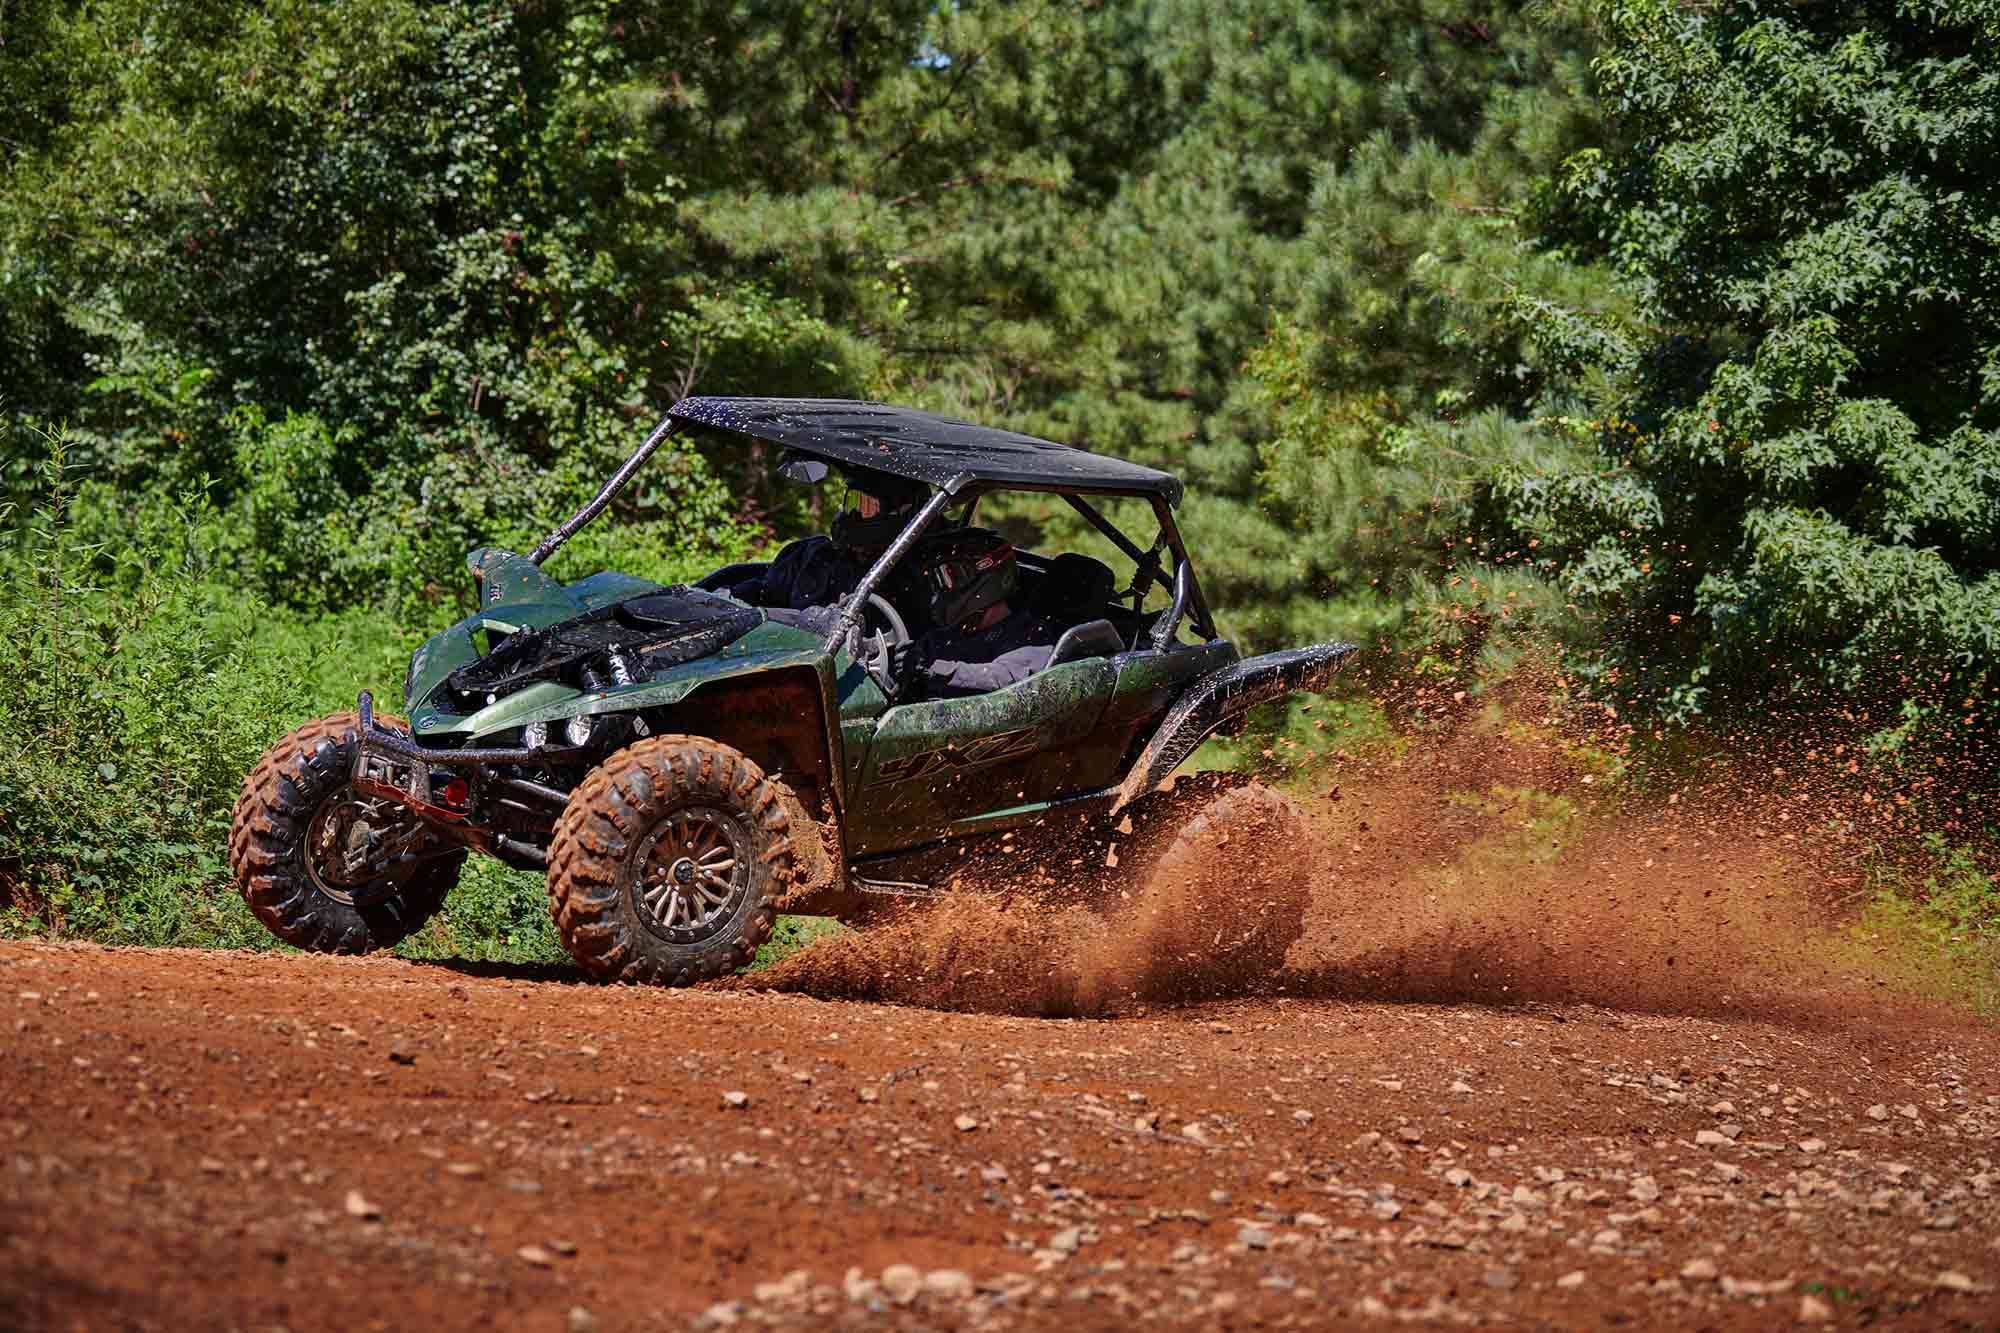 Yamaha’s YXZ1000R SS XT-R is a woods weapon, with sharp handling and supple suspension.